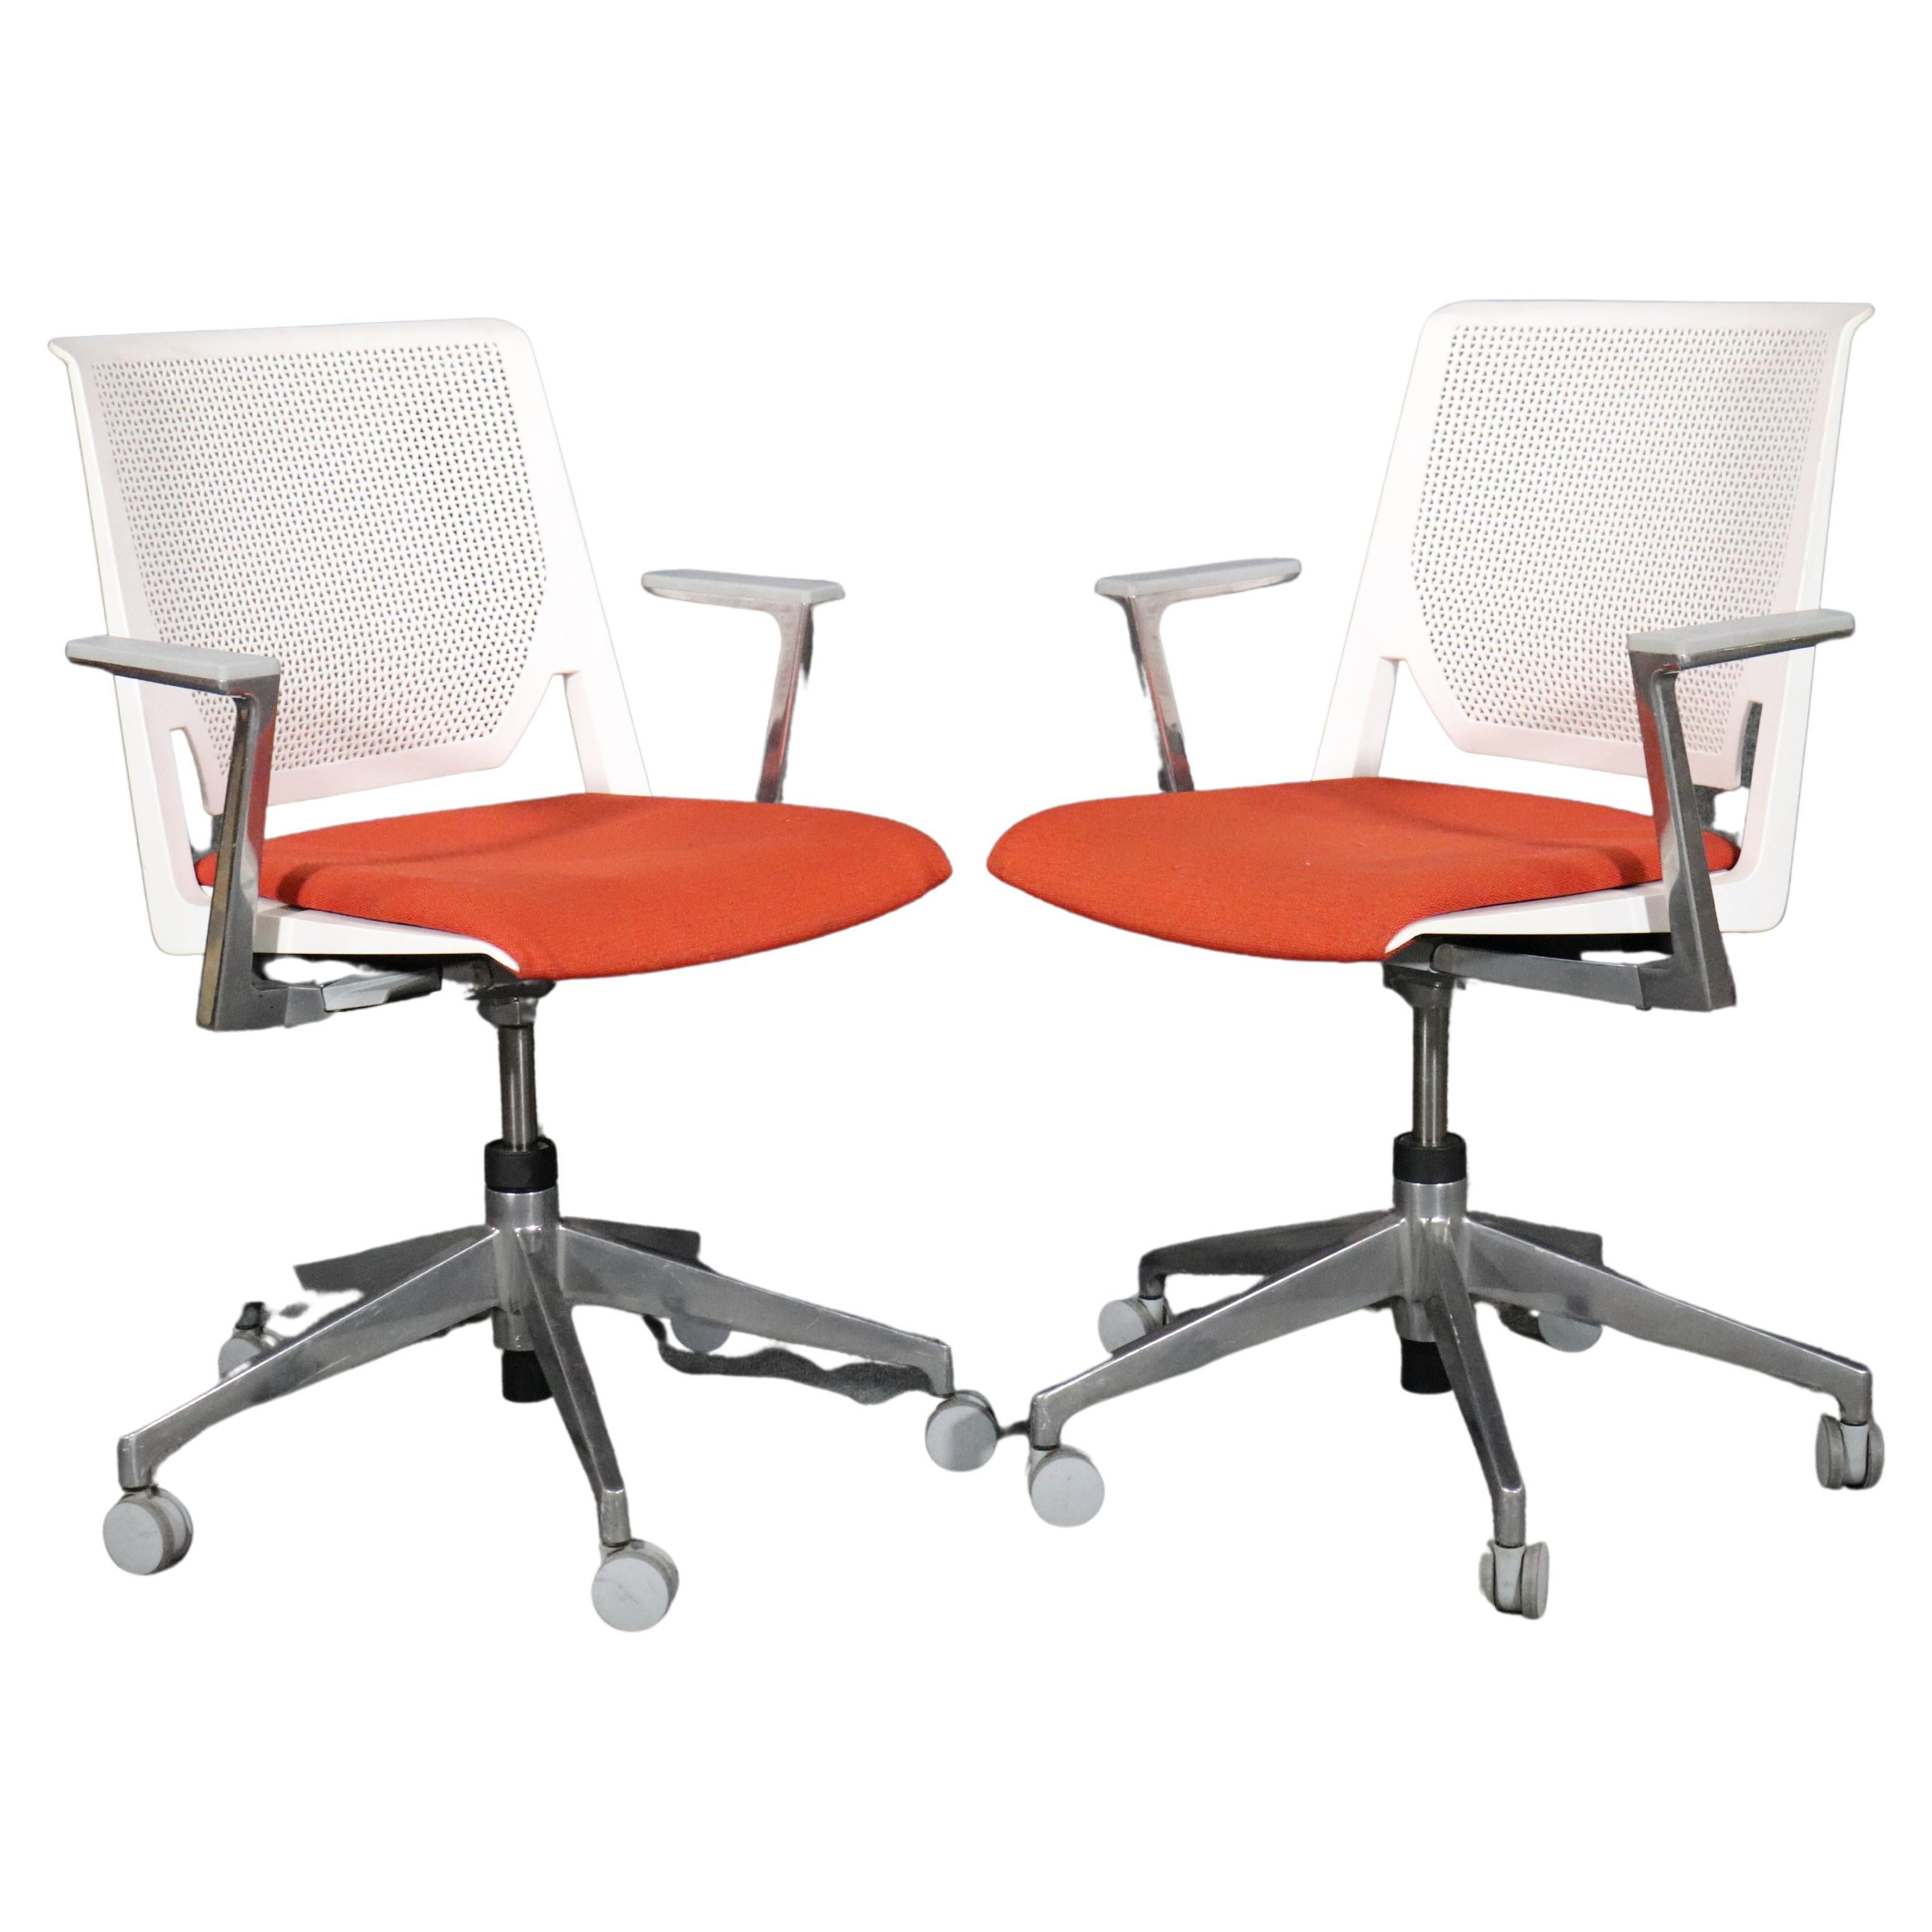 Pair of Mid-Century Modern Office Chairs